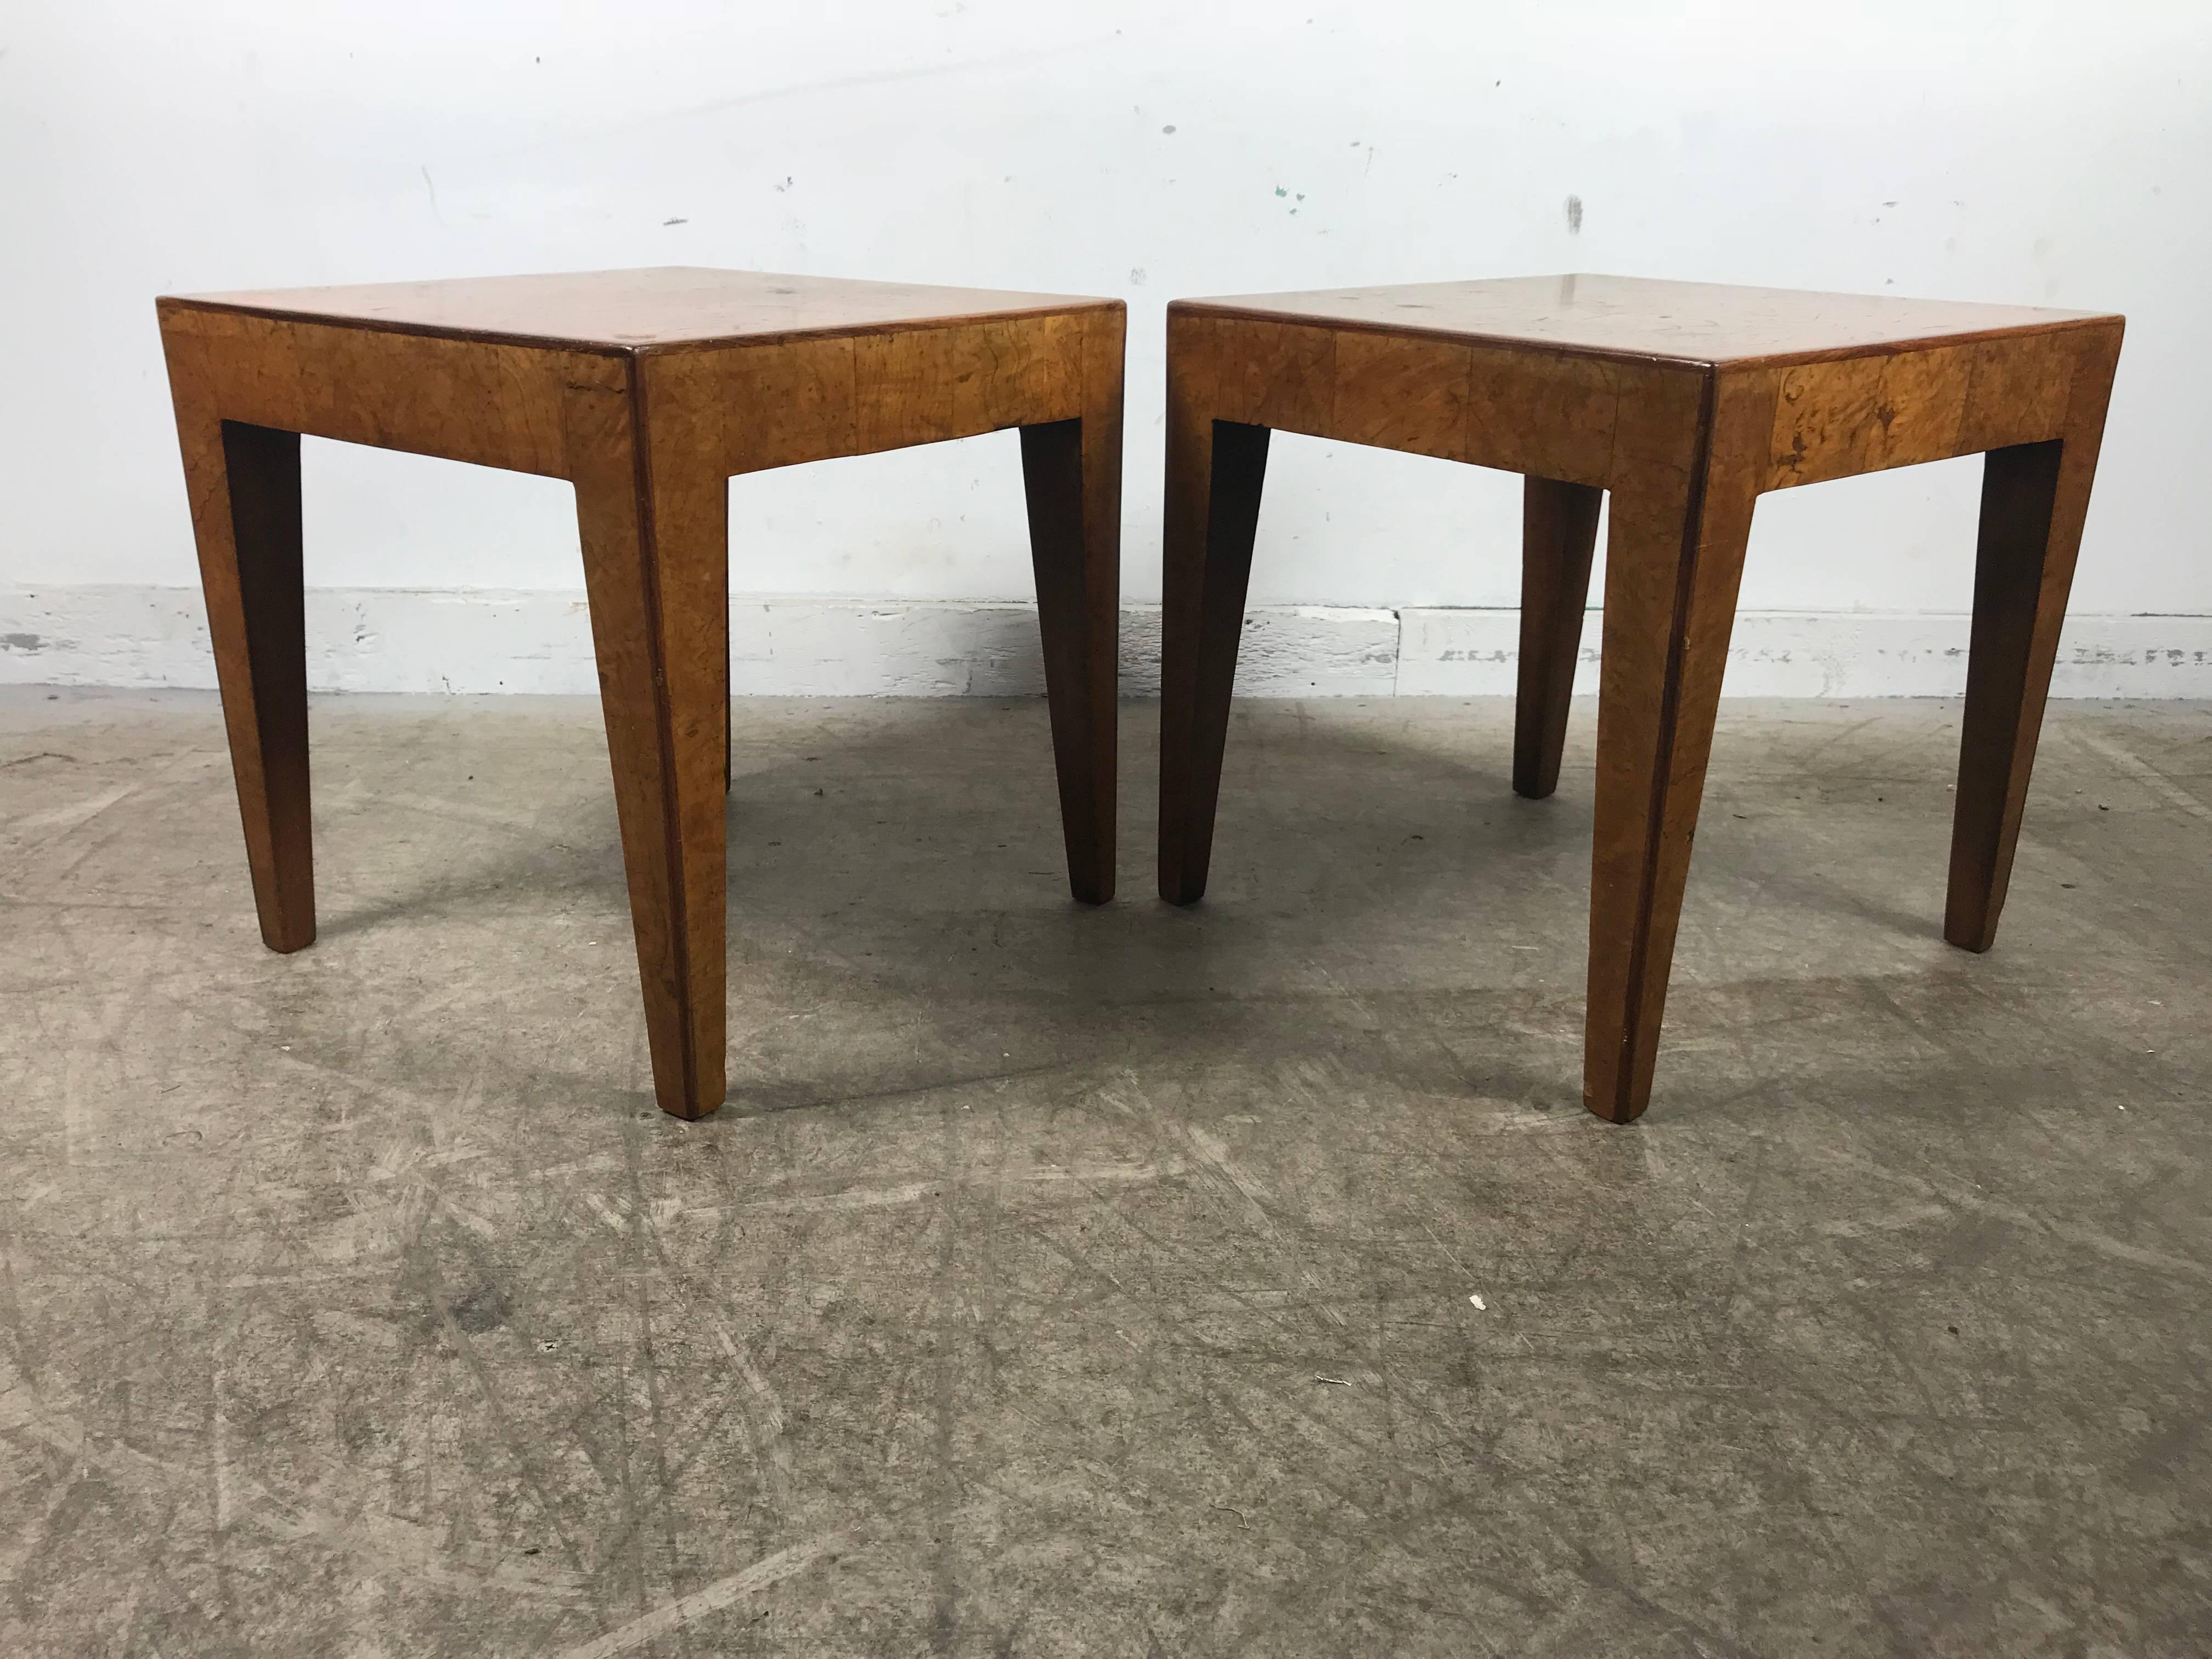 Pair of Elm Burl Wood Italian Modernist Tables 1940s after Willy Rizzo 4